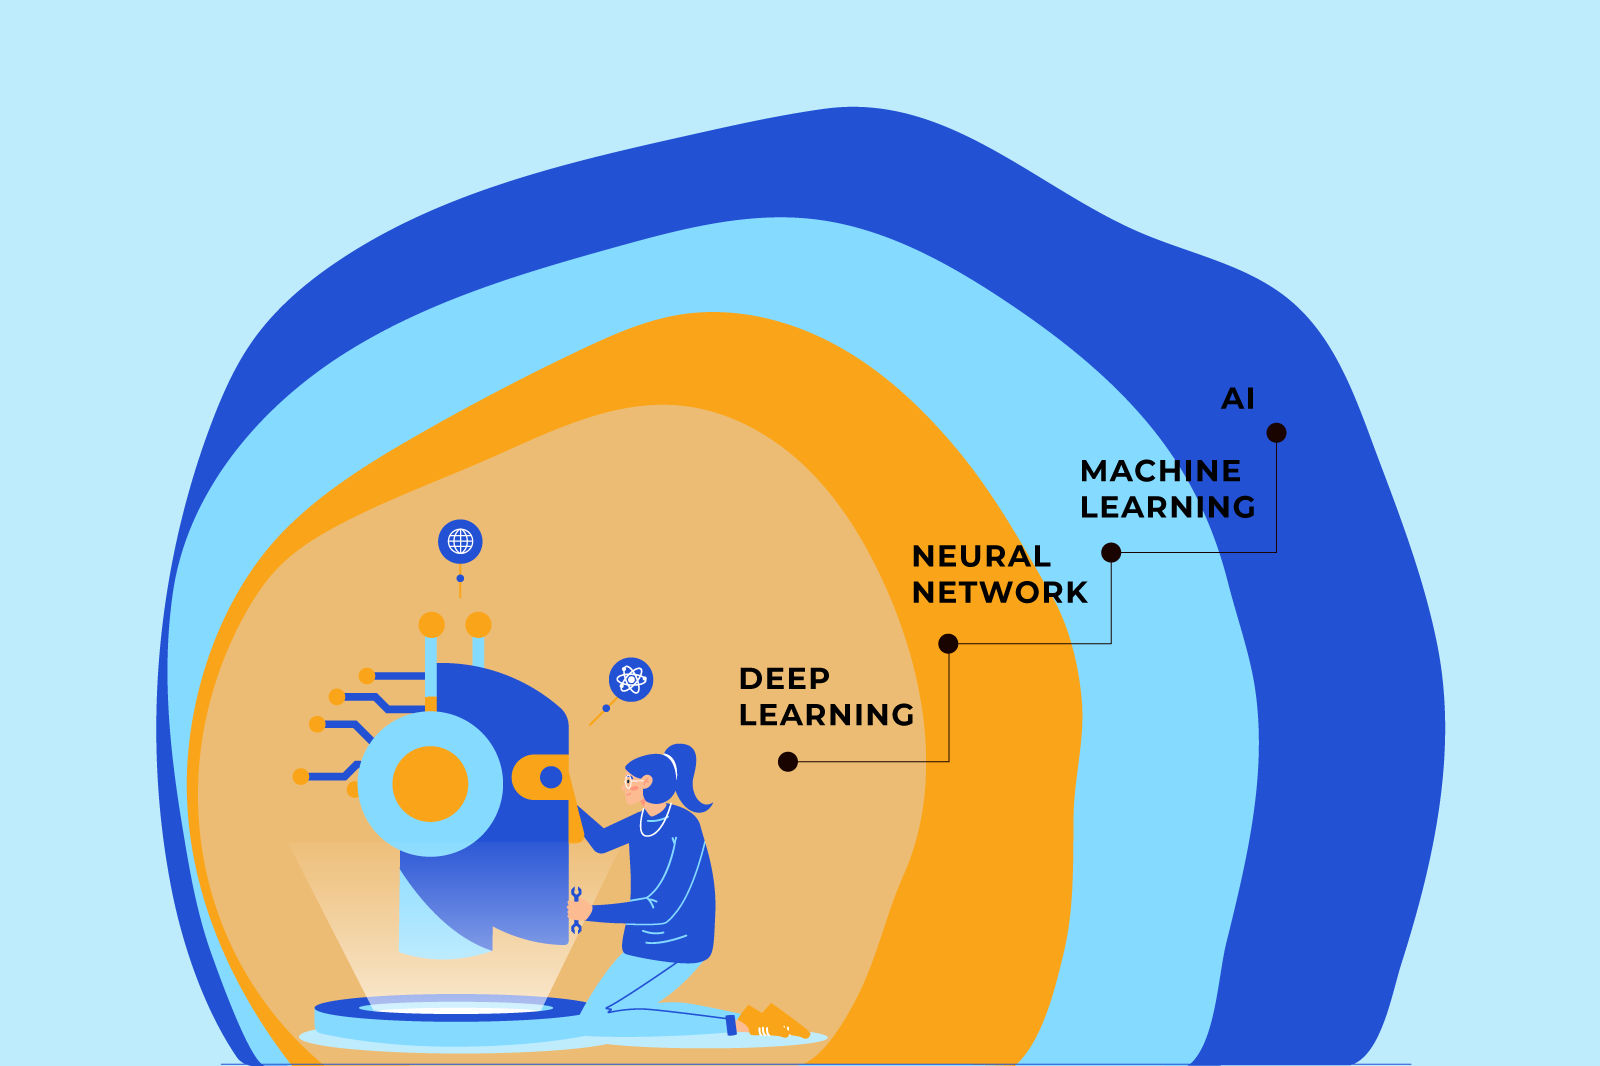 Graphic representation of AI, Machine Learning, Neural Networks, and Deep Learning as concentric layers.